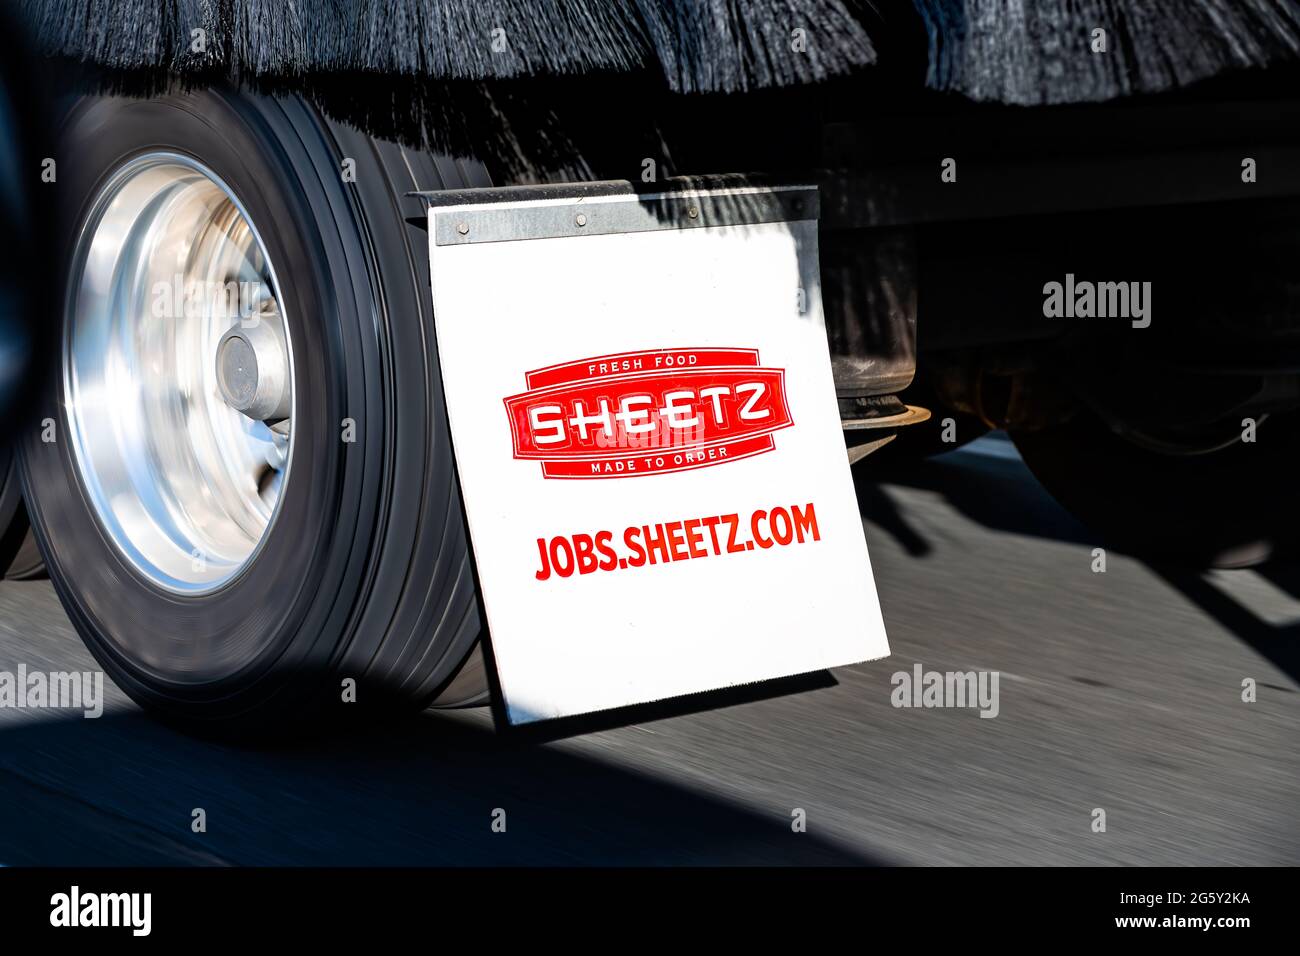 Gainesville, USA - May 8, 2021: Highway road i-66 in Virginia with closeup of Sheetz fuel tank truck sign for jobs hiring at gas station and drivers Stock Photo